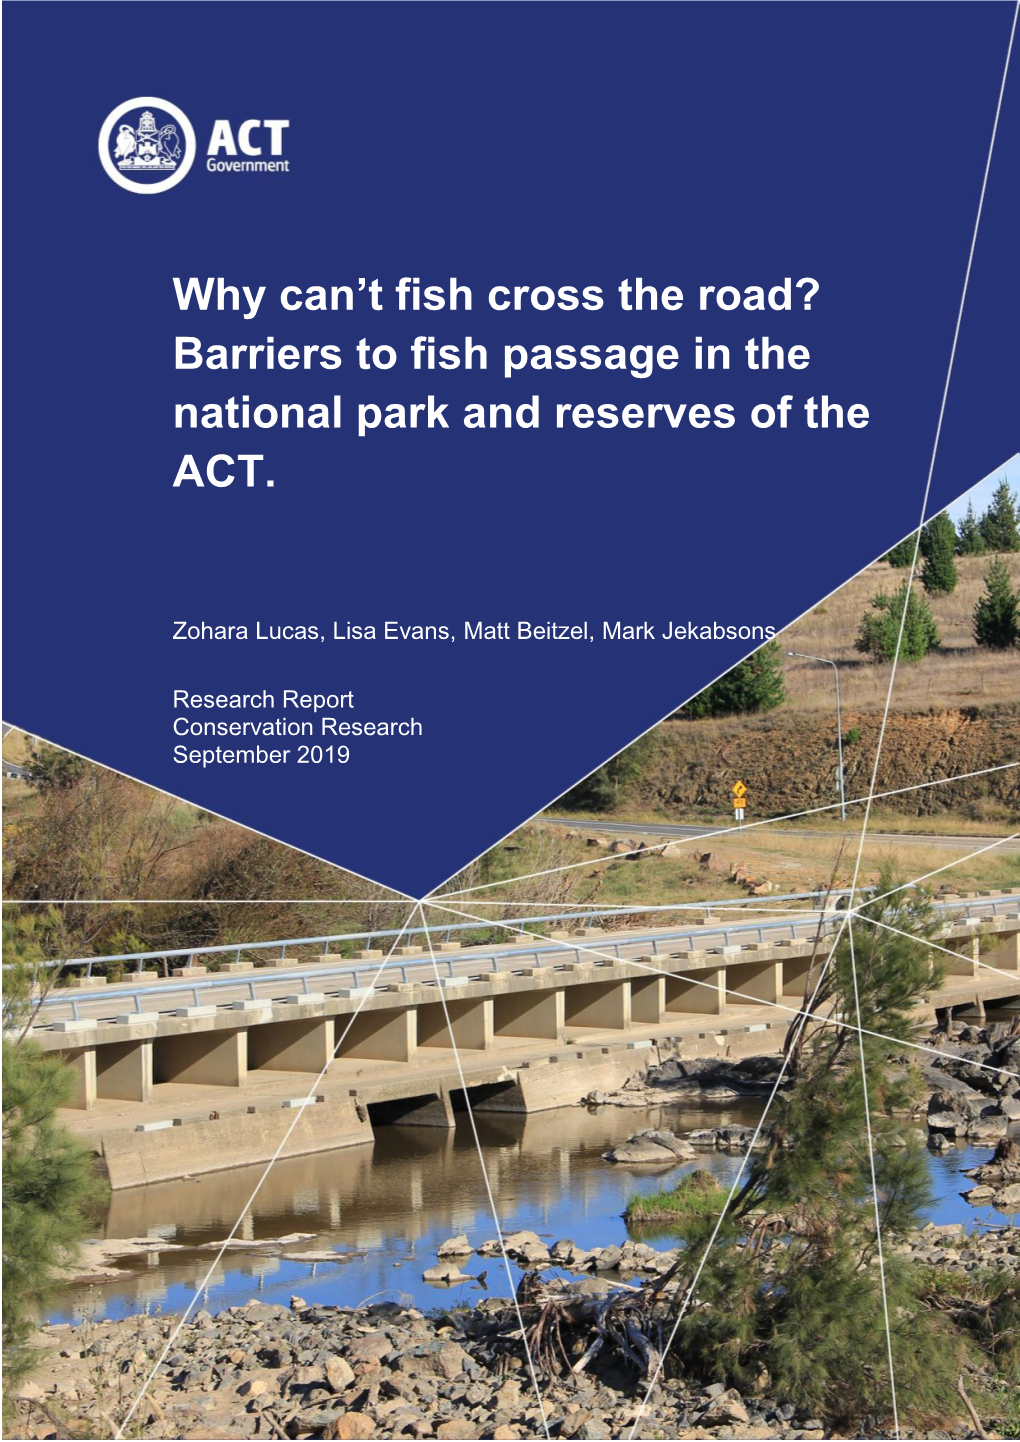 Why Can't Fish Cross the Road? Barriers to Fish Passage in the National Park